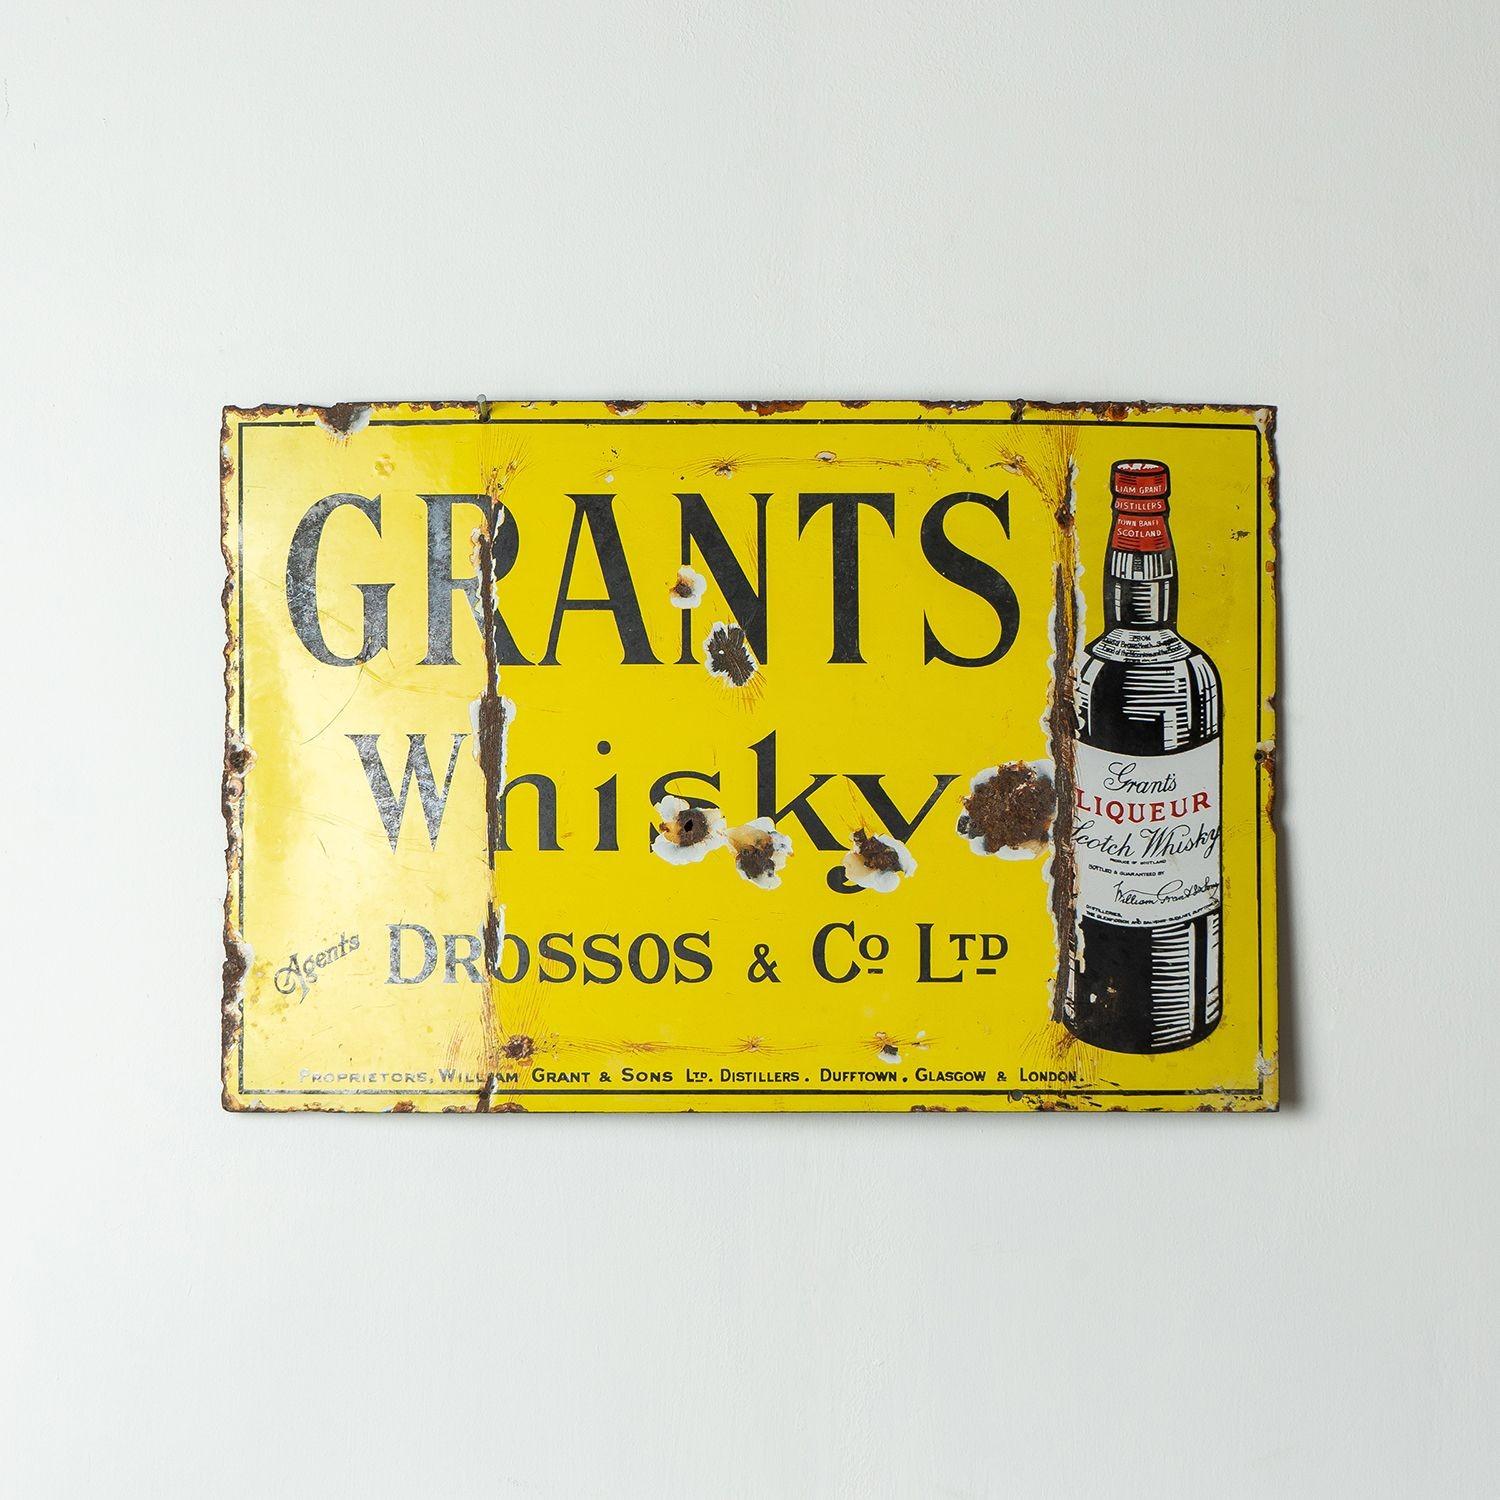 Scottish Vintage Grants Scotch Whisky Enamel Advertising Sign, Early 20th Century Whiskey For Sale